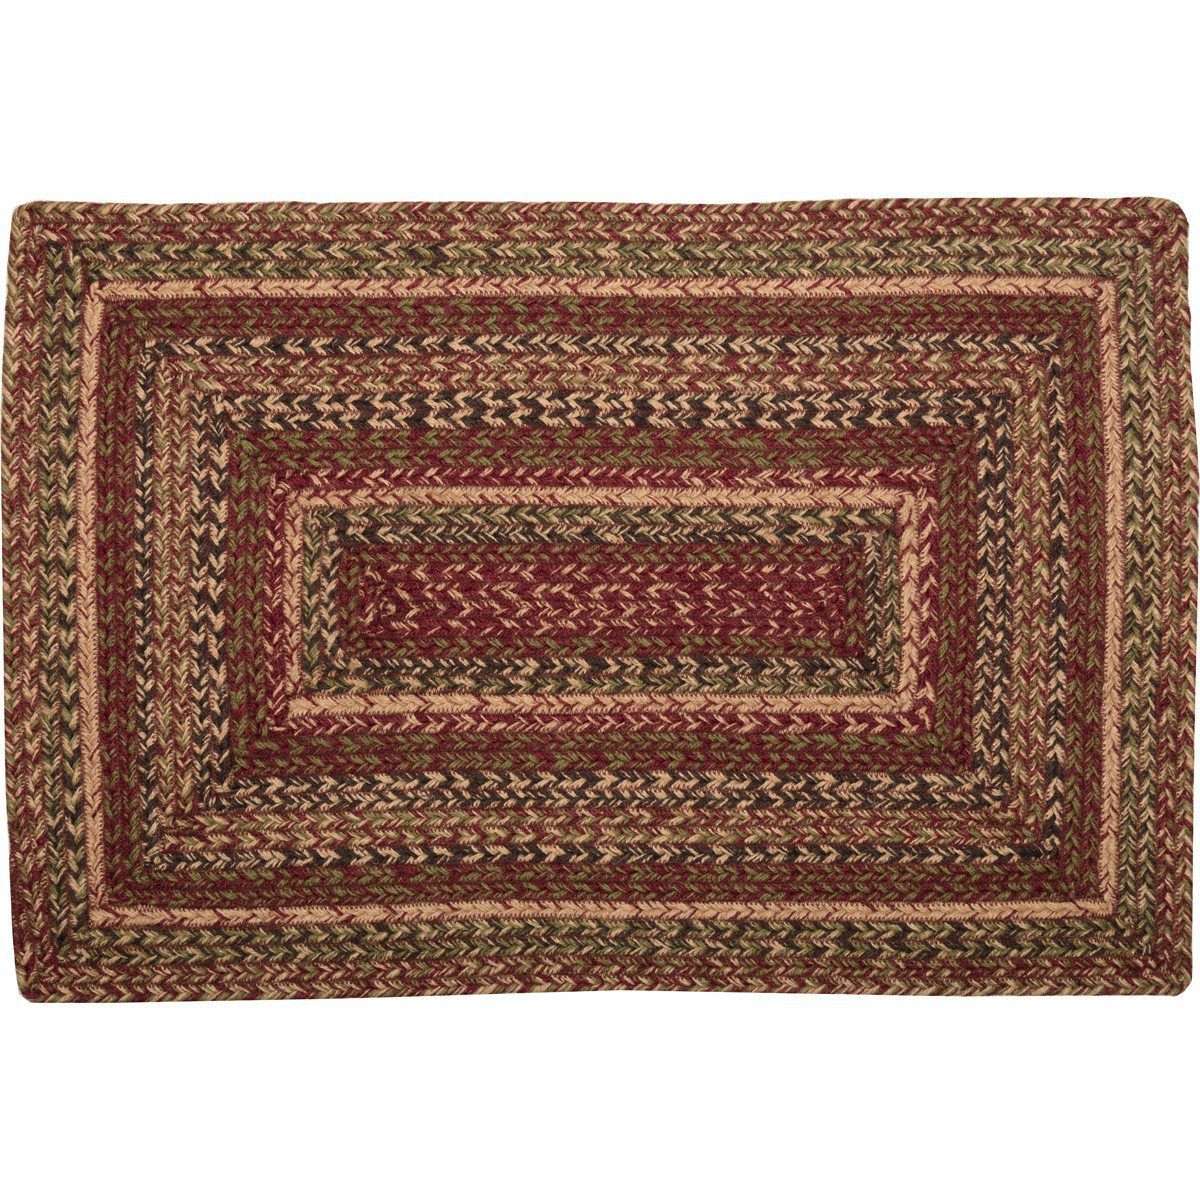 Cider Mill Jute Braided Rugs Rectangle VHC Brands Rugs VHC Brands 